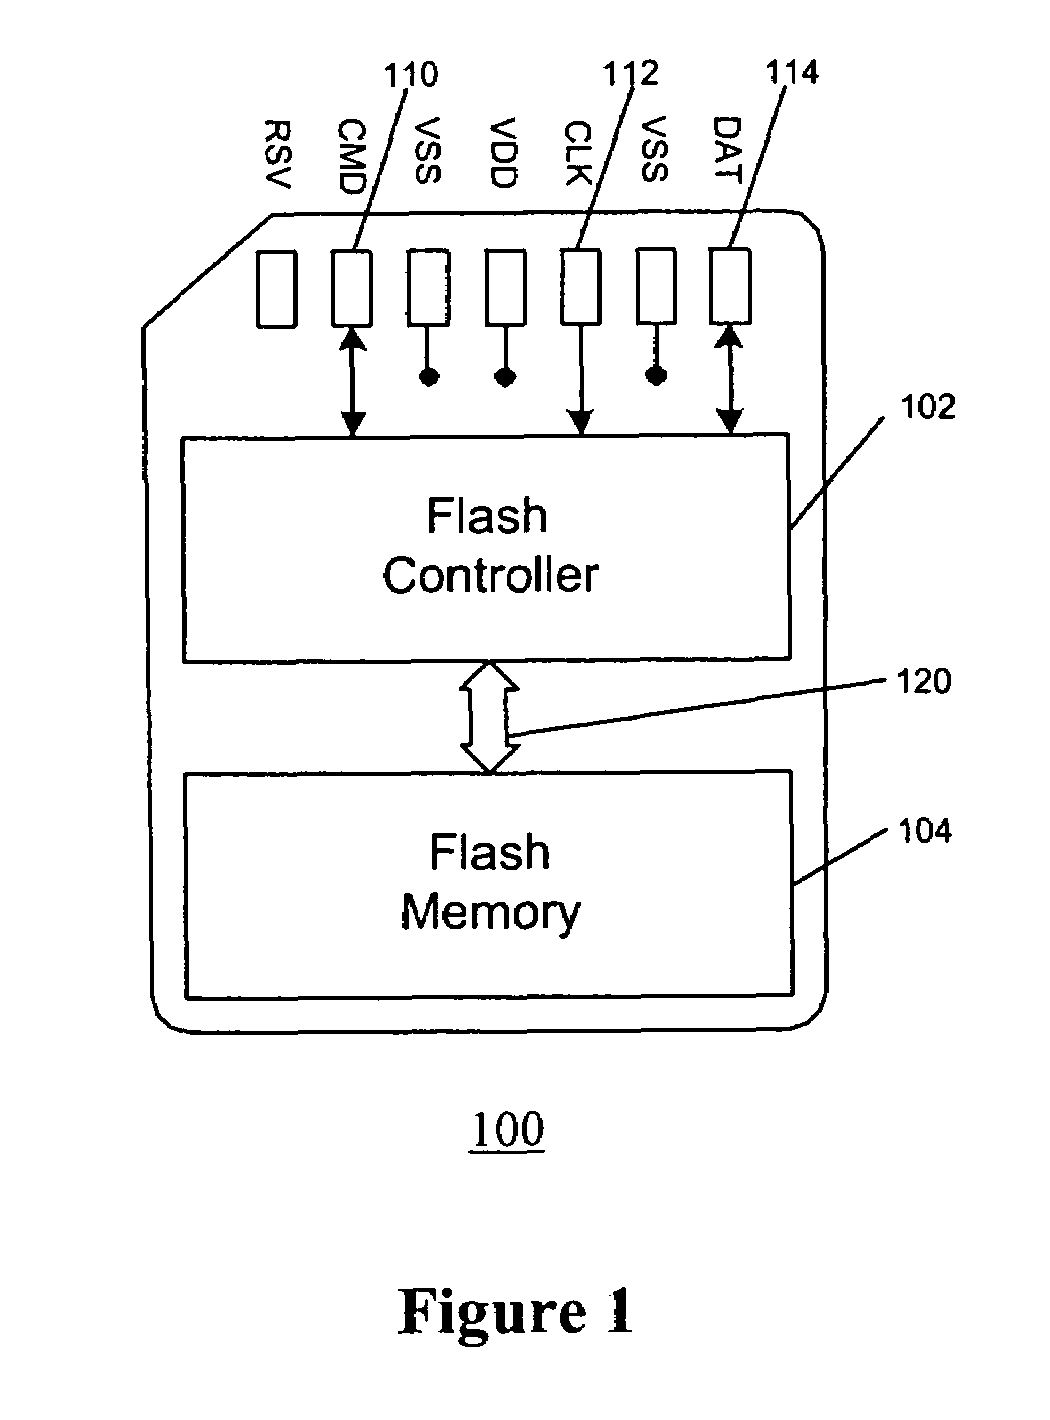 Flash memory system with a high-speed flash controller